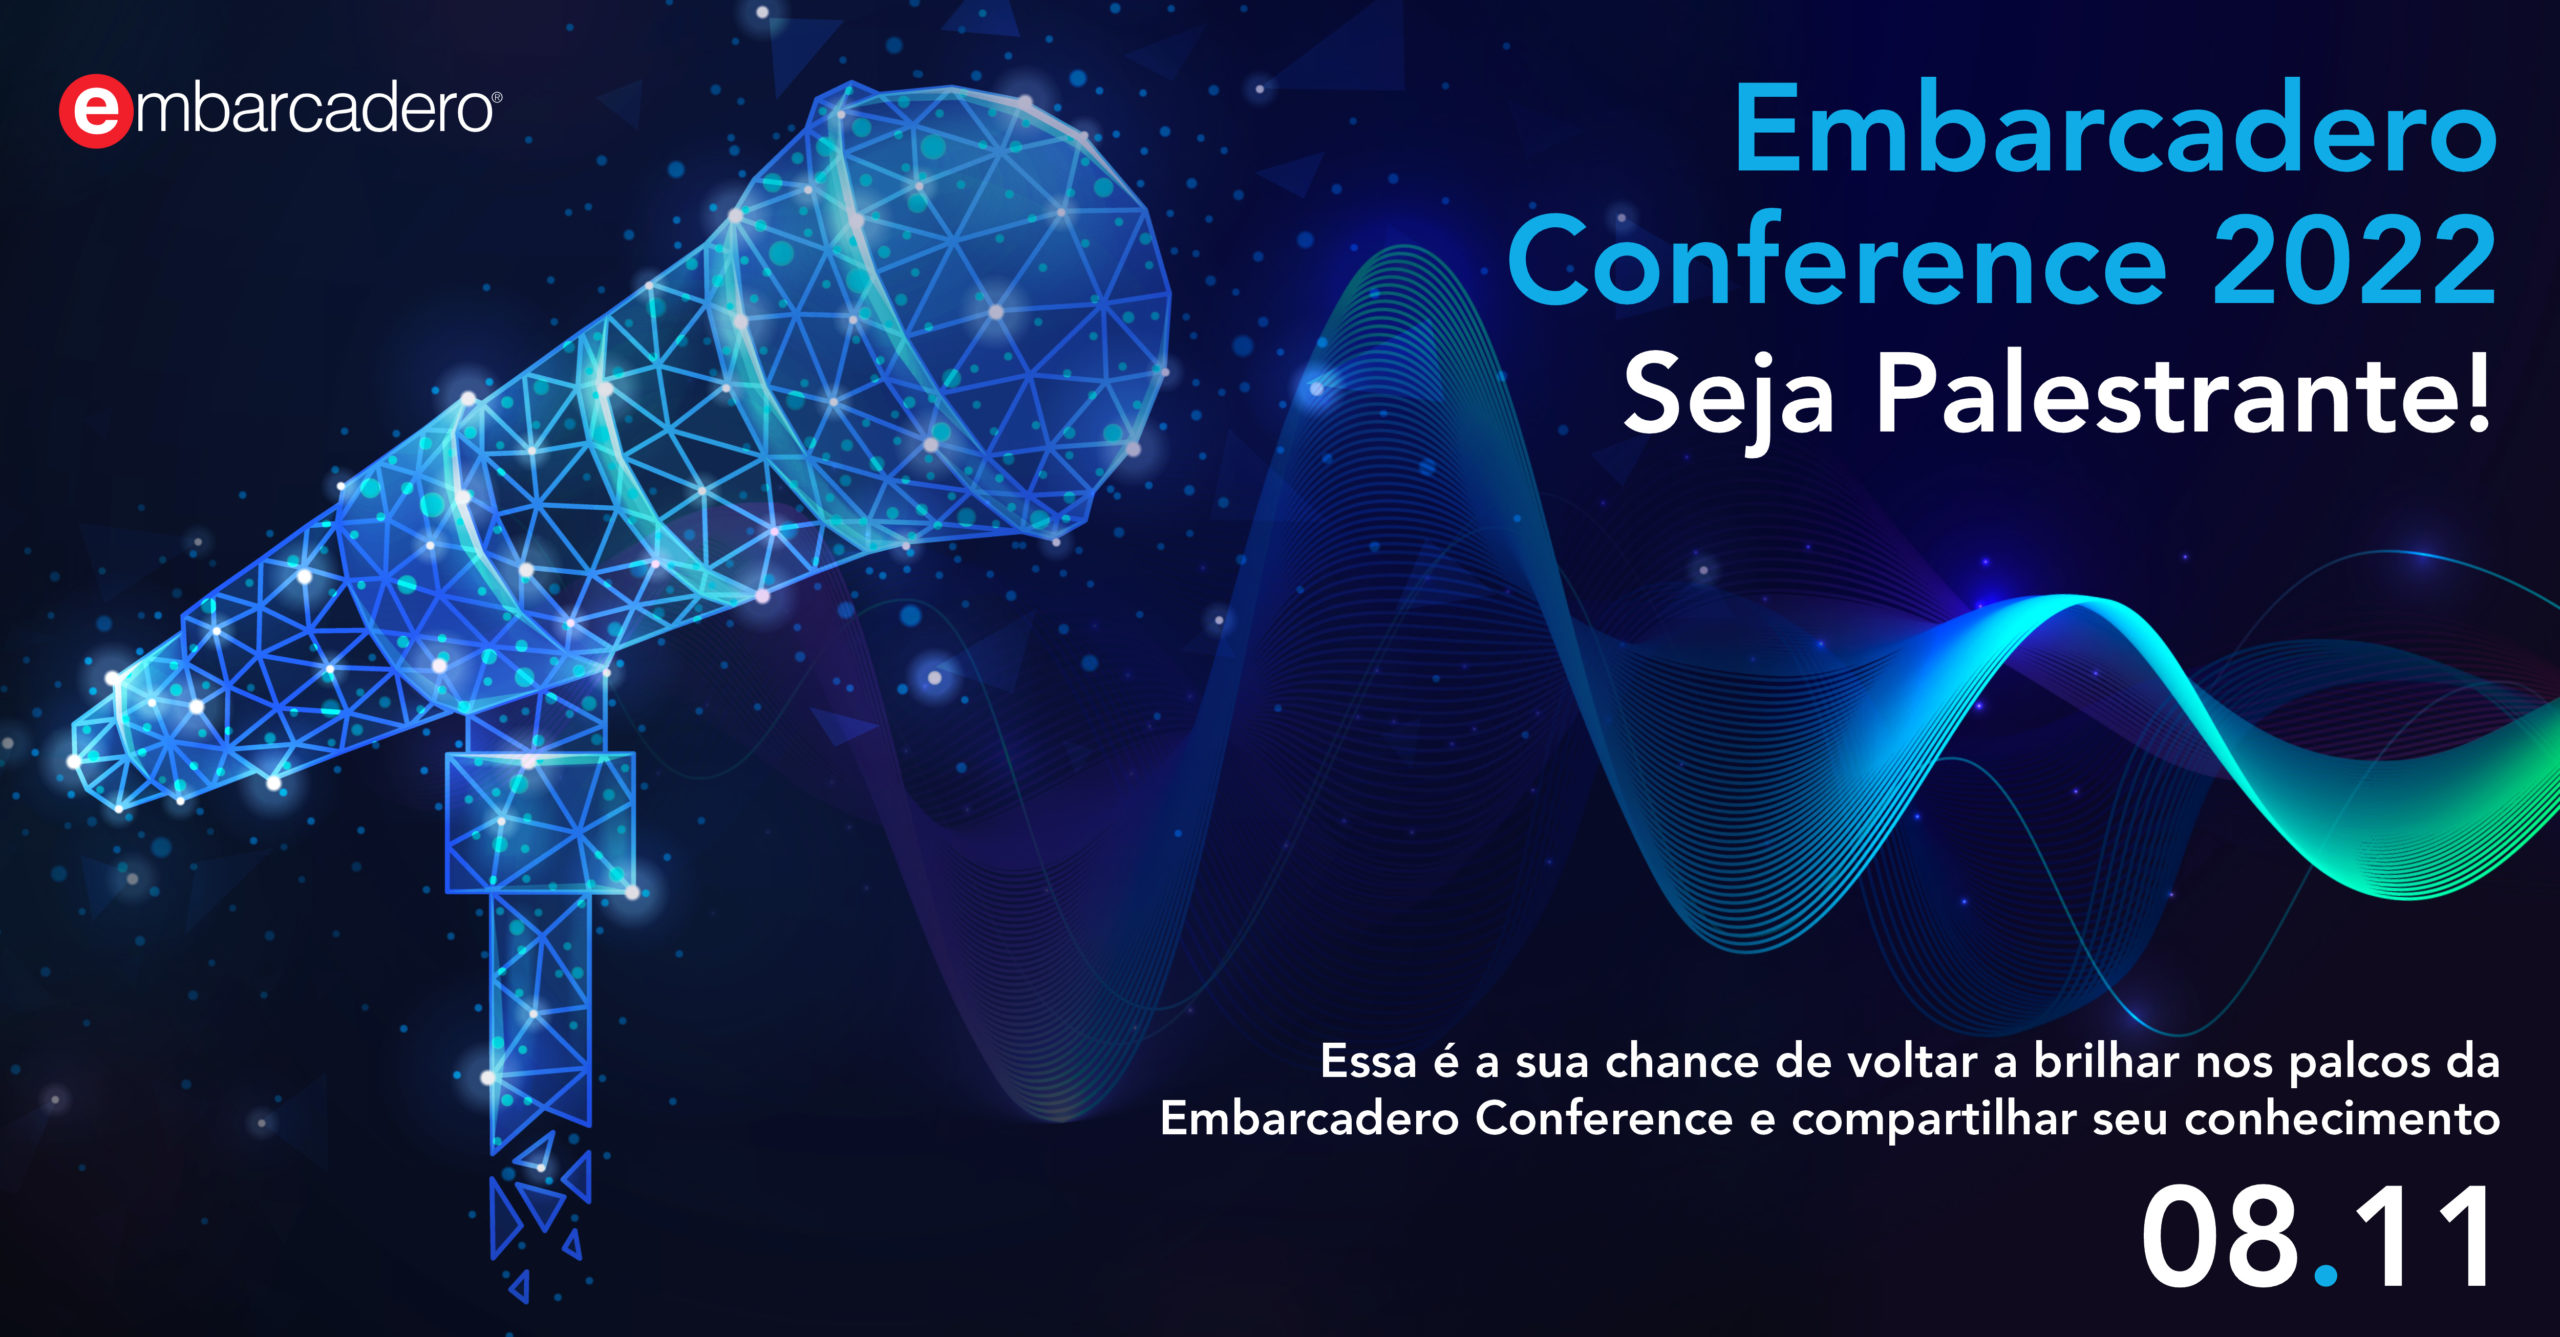 Embarcadero Conference 2022 - Call for Papers